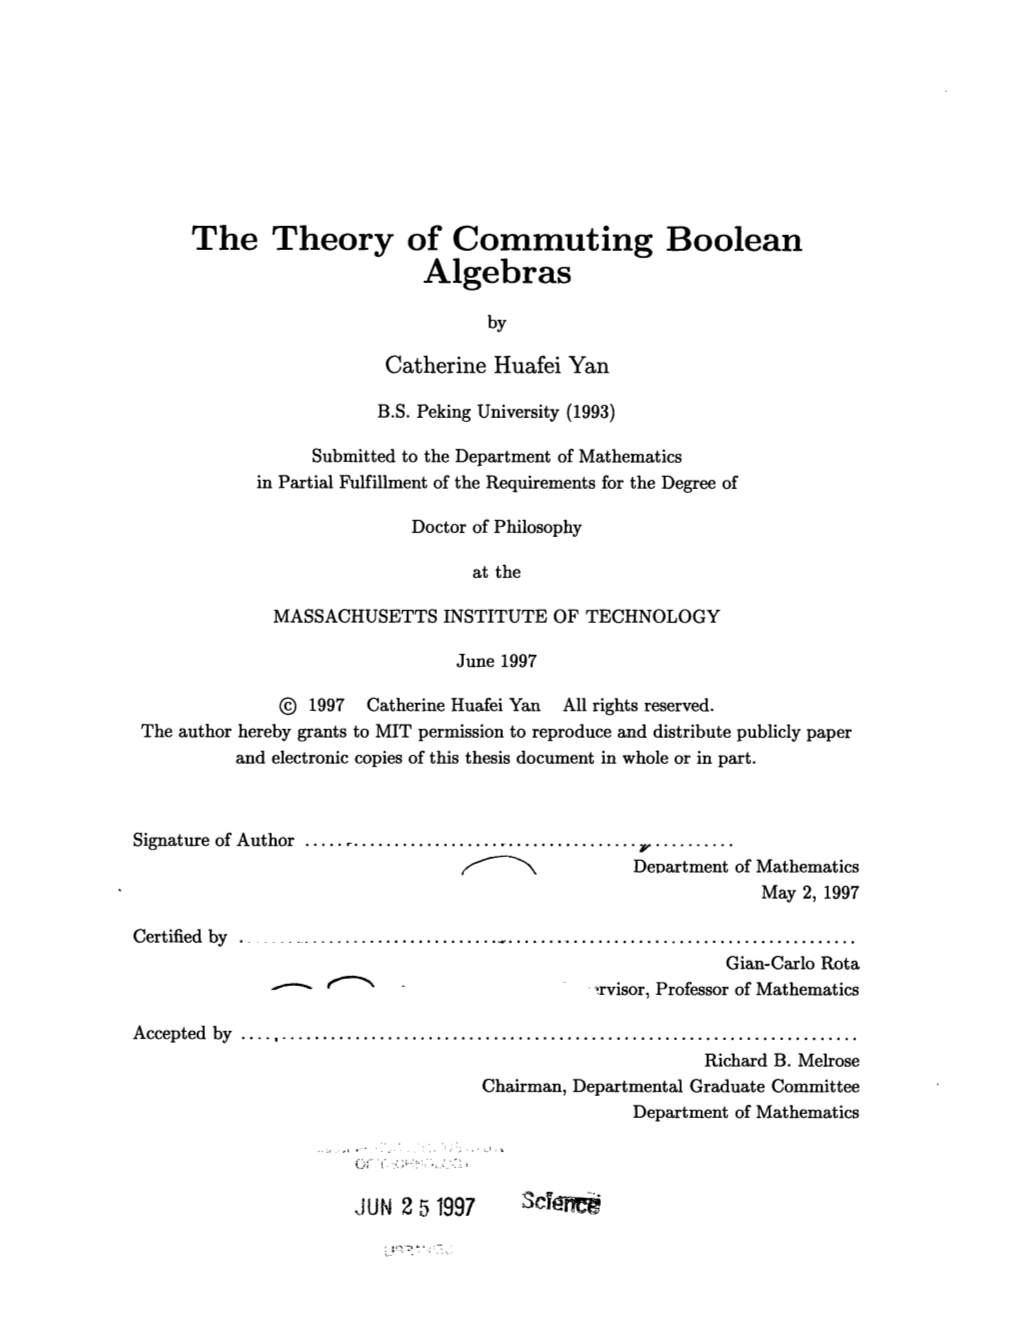 The Theory of Commuting Boolean Algebras by Catherine Huafei Yan